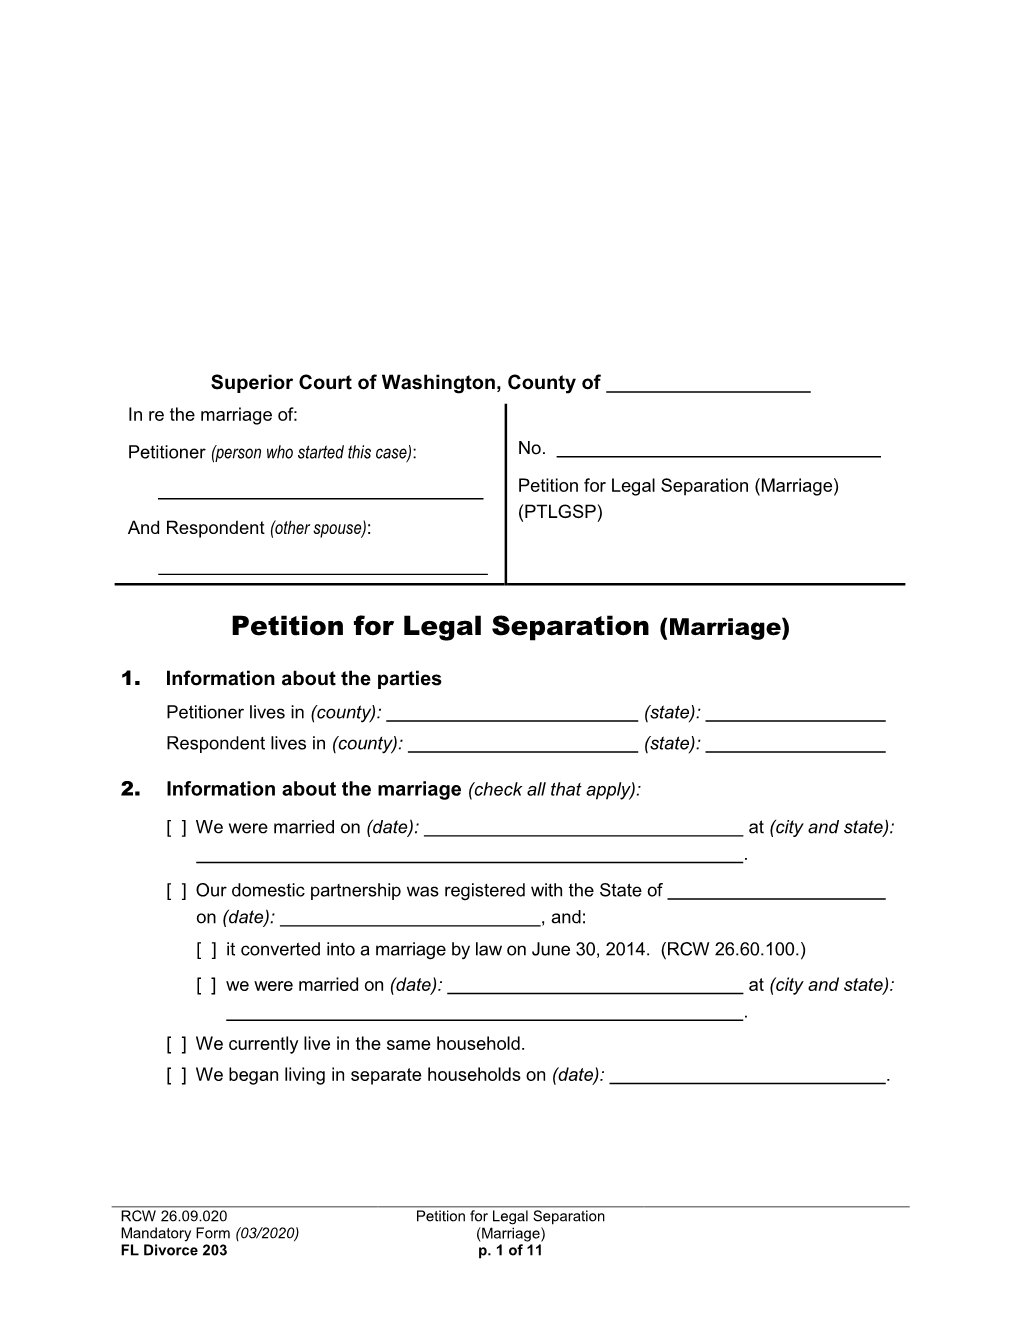 Petition for Legal Separation (Marriage) (PTLGSP) and Respondent (Other Spouse)